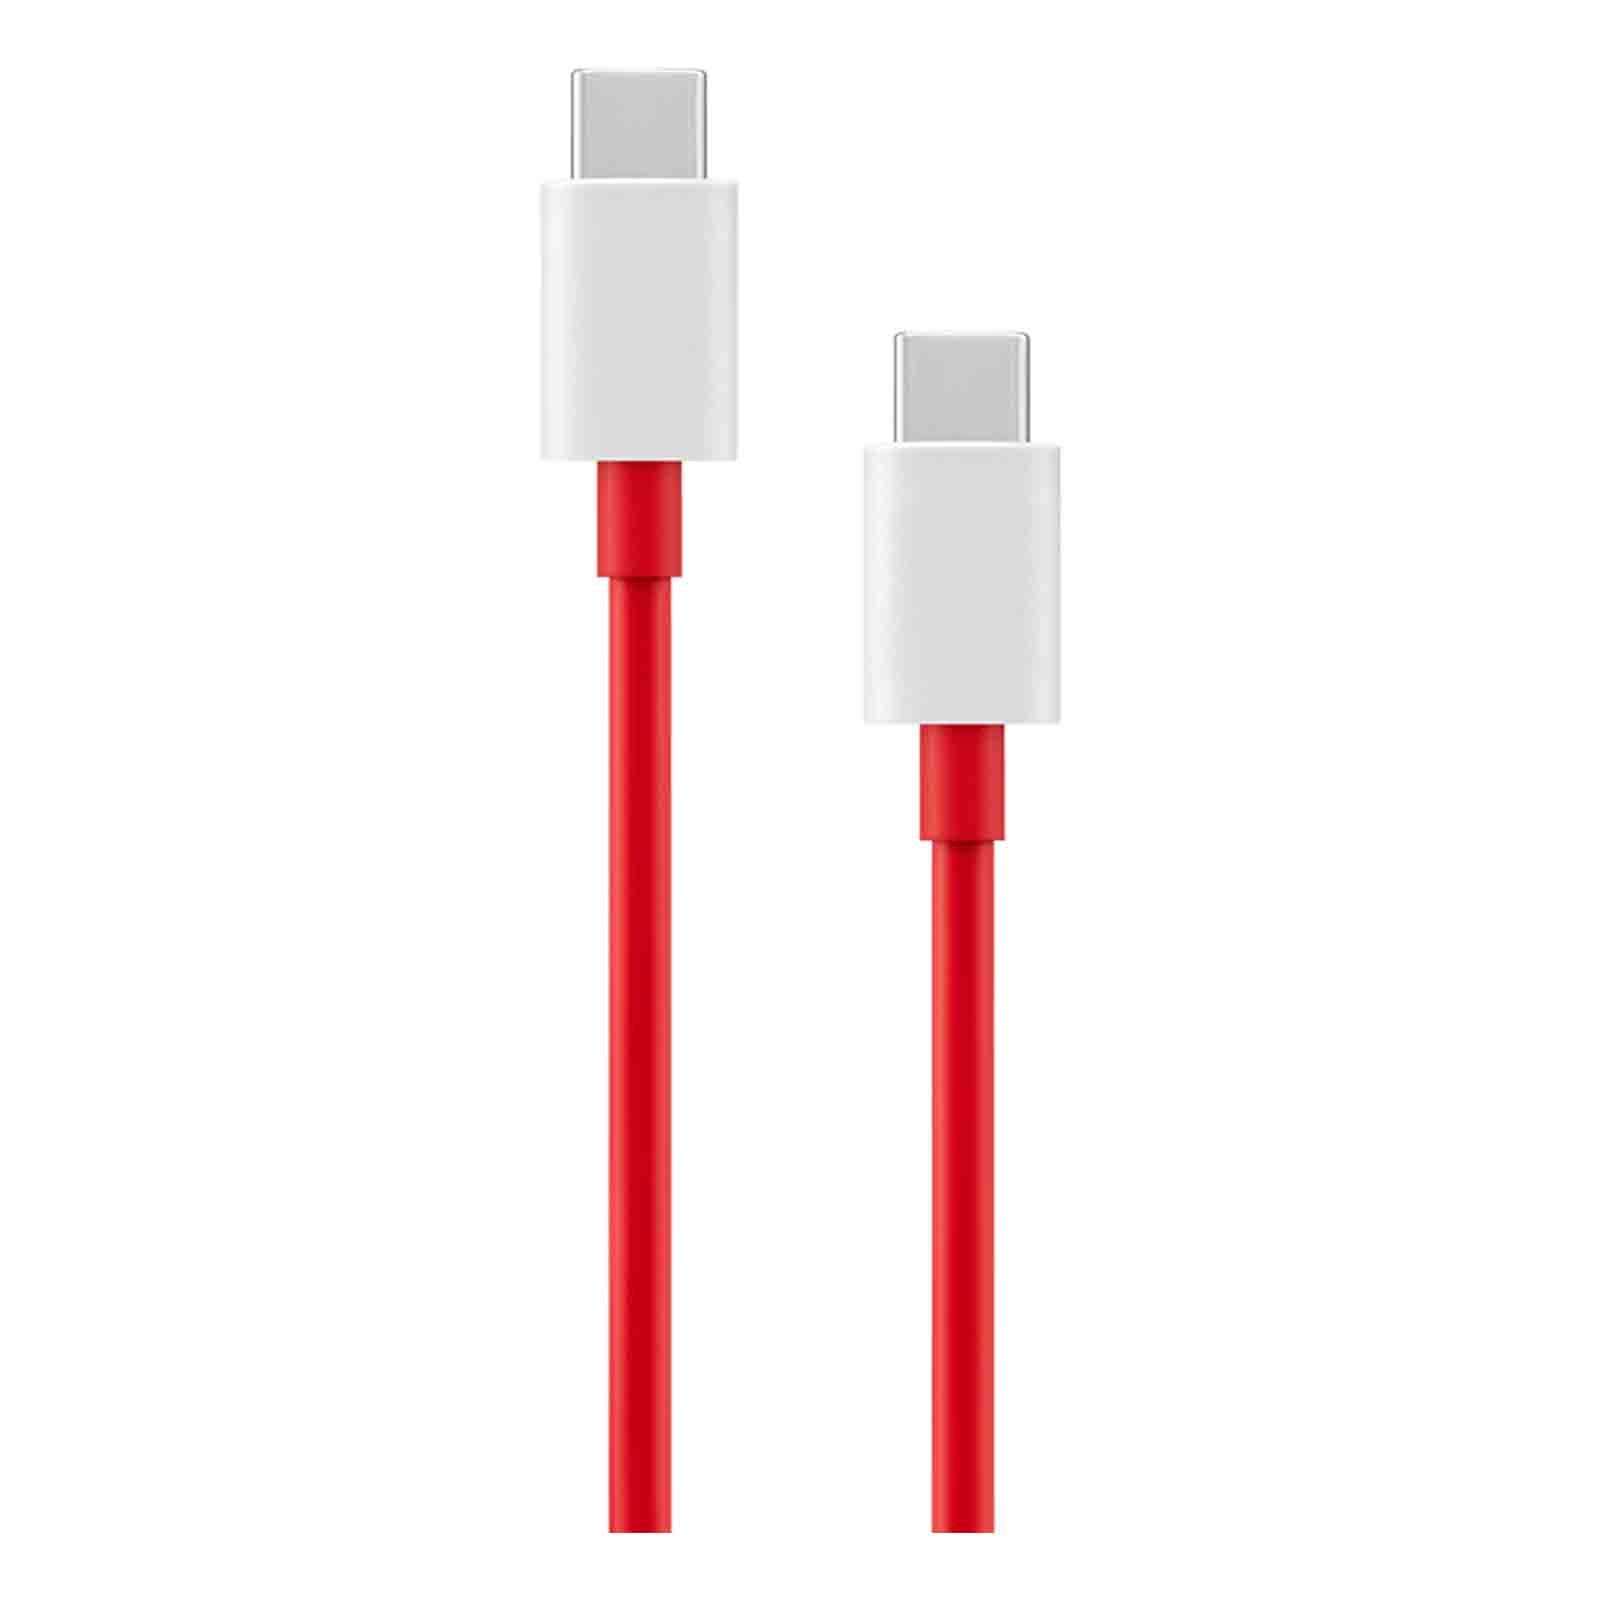 Oneplus Warp Charge Type-C to Type-C Data Cable Red-1 Meter